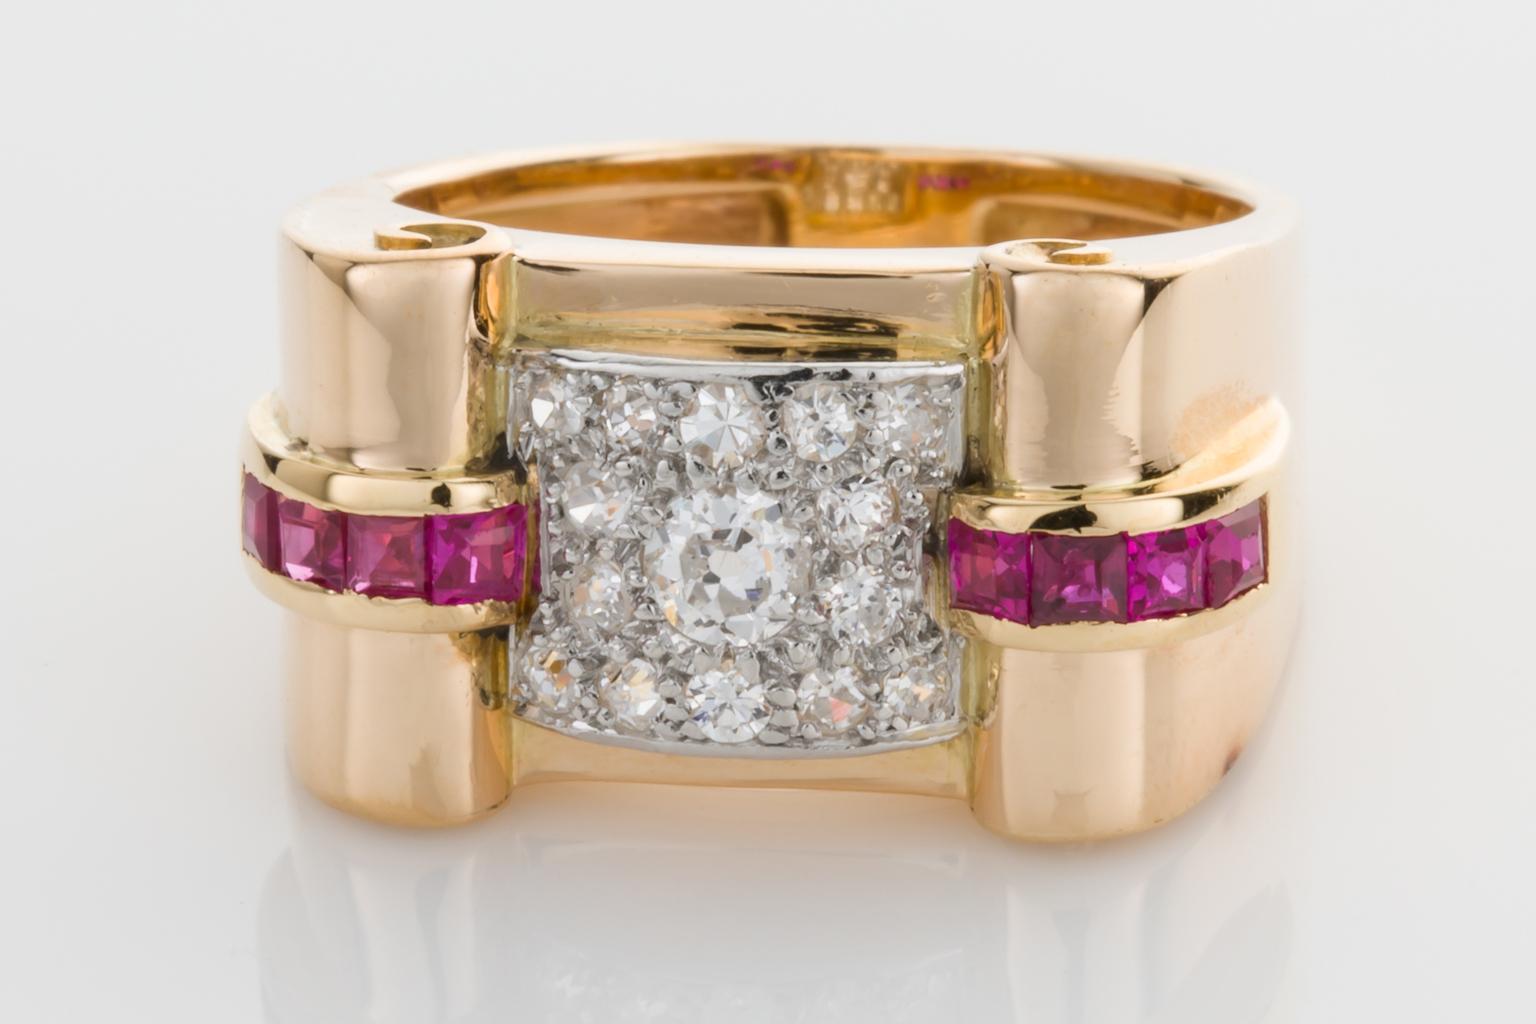 So Chic! This fabulously stylish French Tank ring excludes class with high polish 18k yellow gold set with an old European cut diamond to the centre surrounded by single cut diamonds. Accented by 8 square cut rubies (untested) on the shoulders with